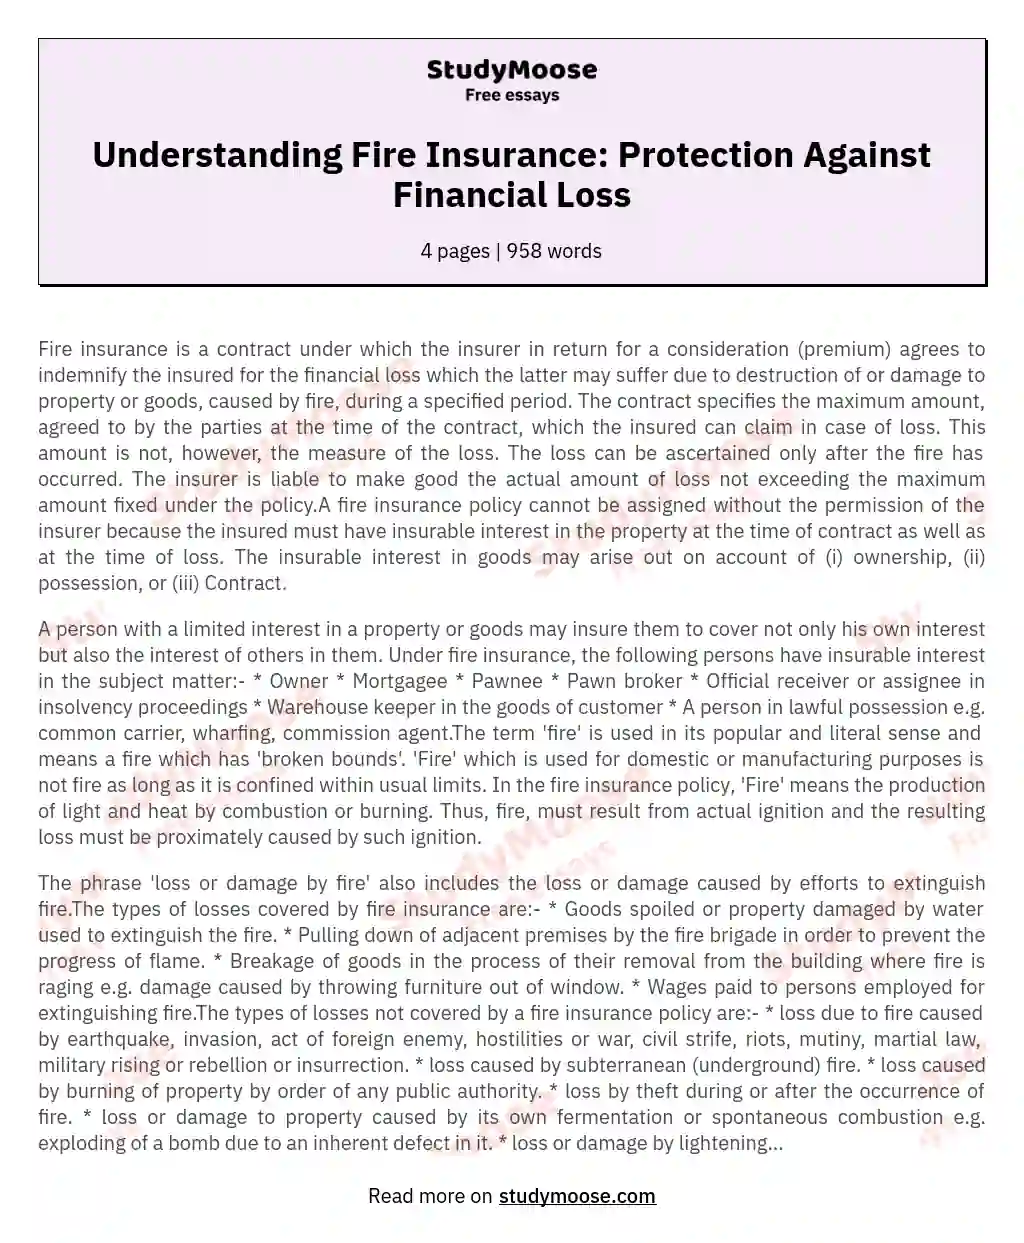 Understanding Fire Insurance: Protection Against Financial Loss essay